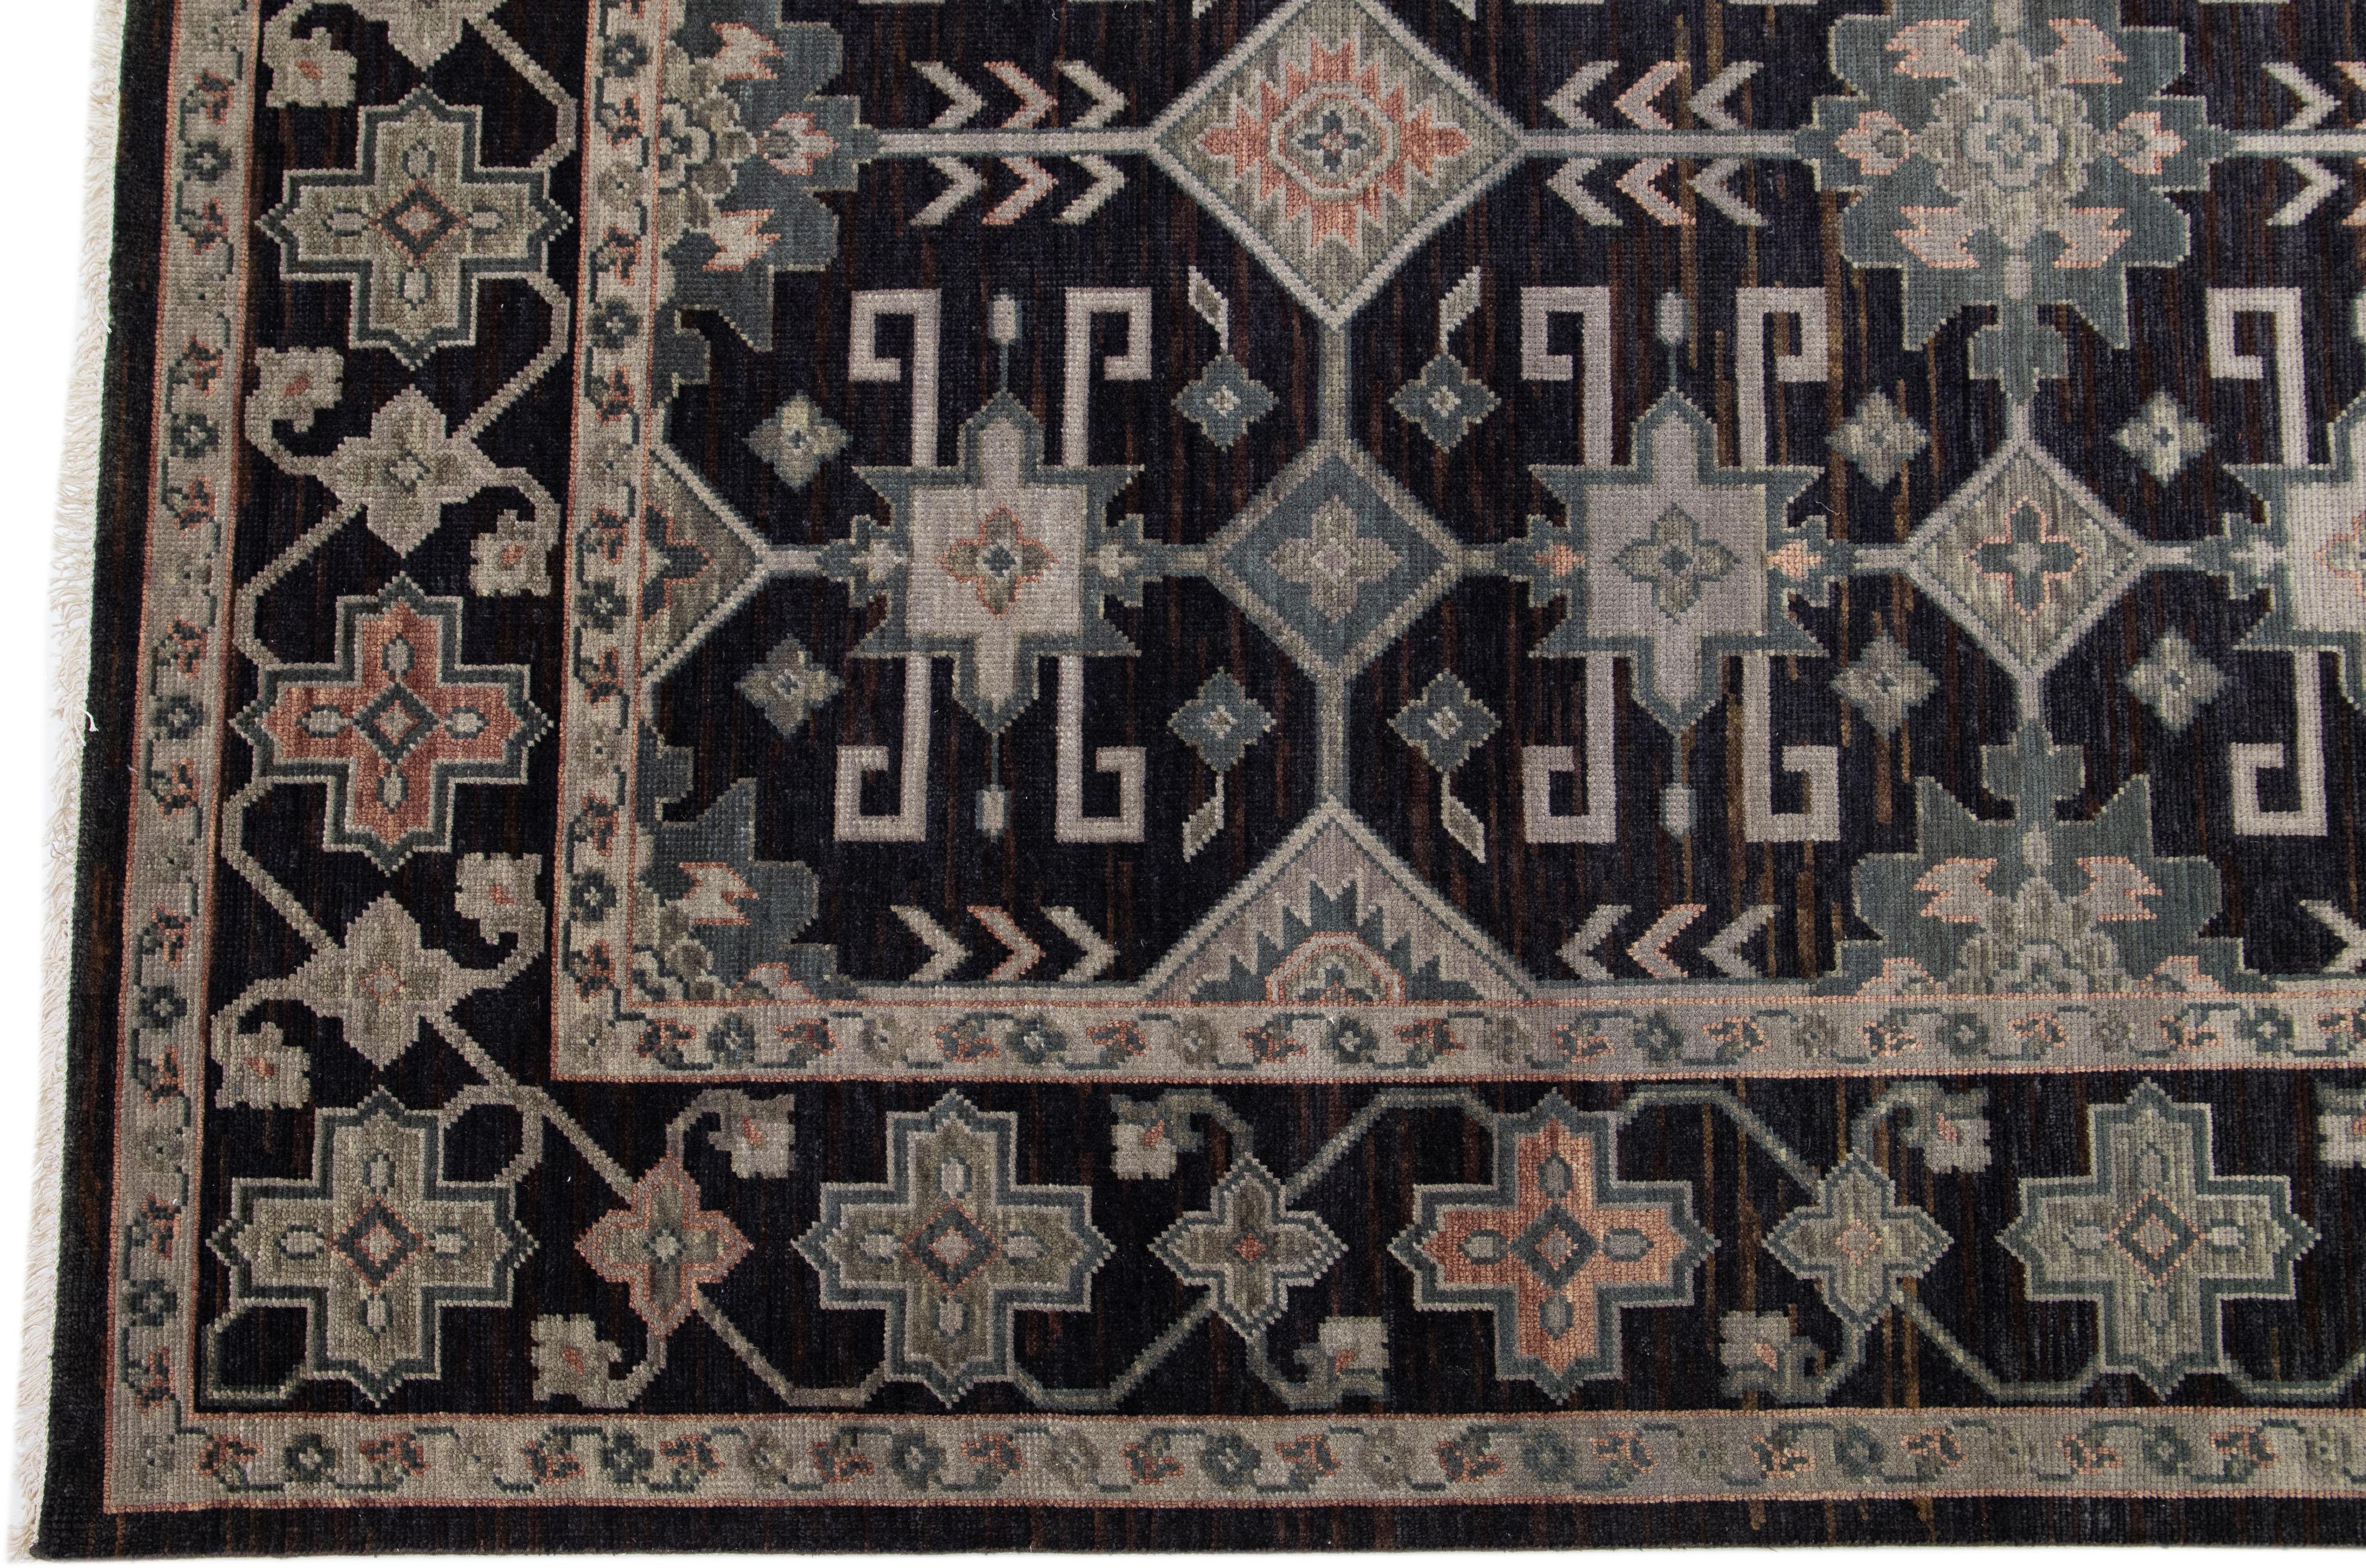 Beautiful modern Oushak hand-knotted wool rug with a charcoal field. This Turkish rug has a designed frame with gray, beige, and peach accents in a gorgeous all-over geometric floral design.

This rug measures: 10'1